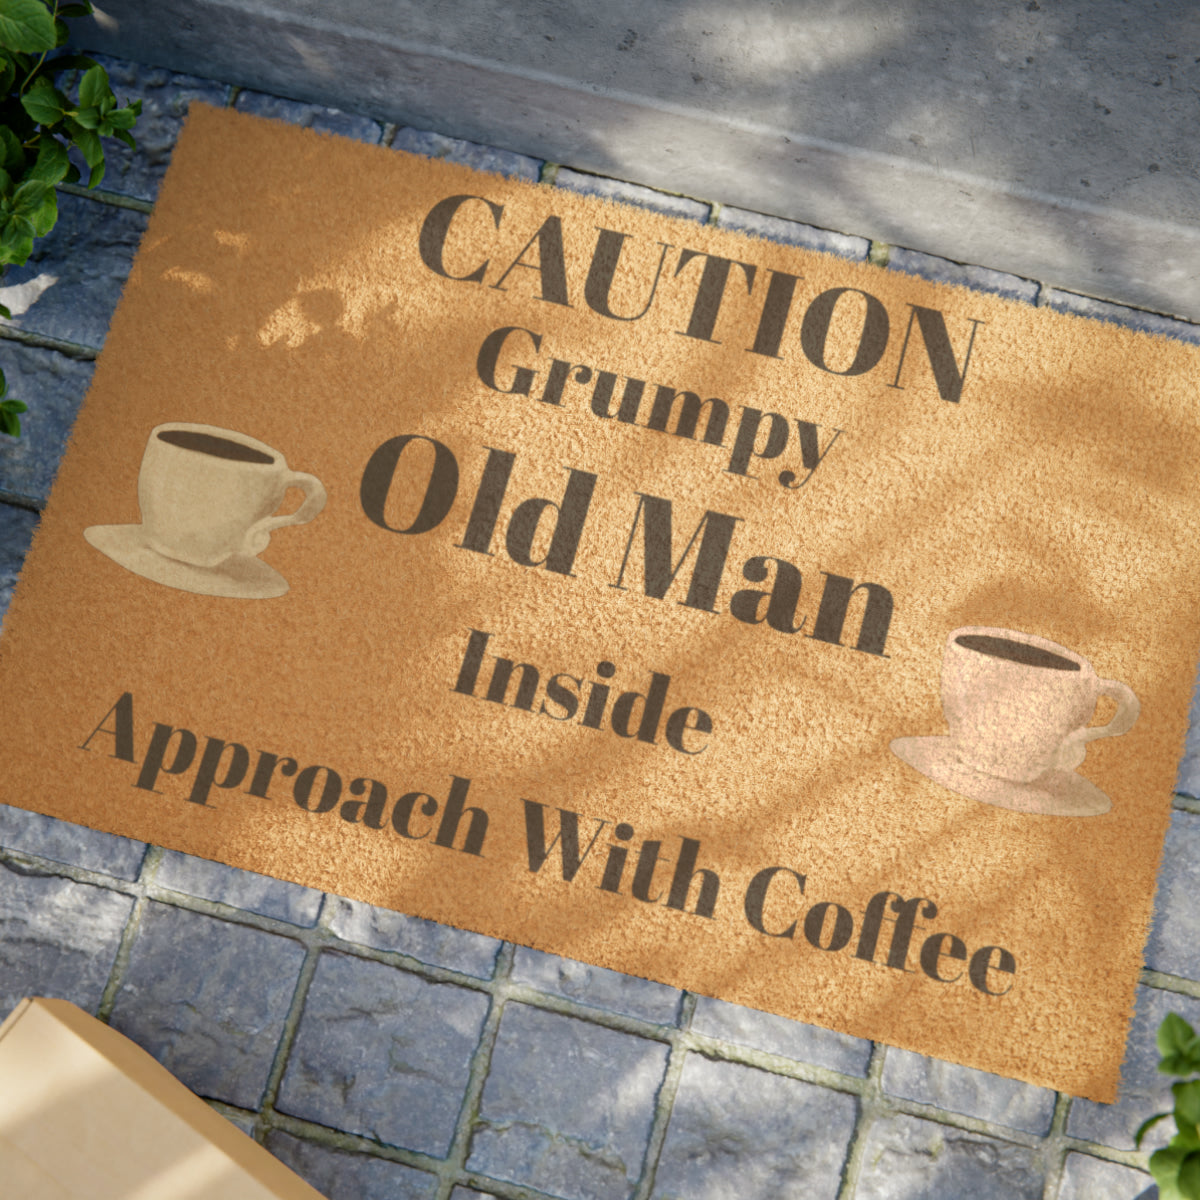 Personalize Approach With Coffee - Doormat